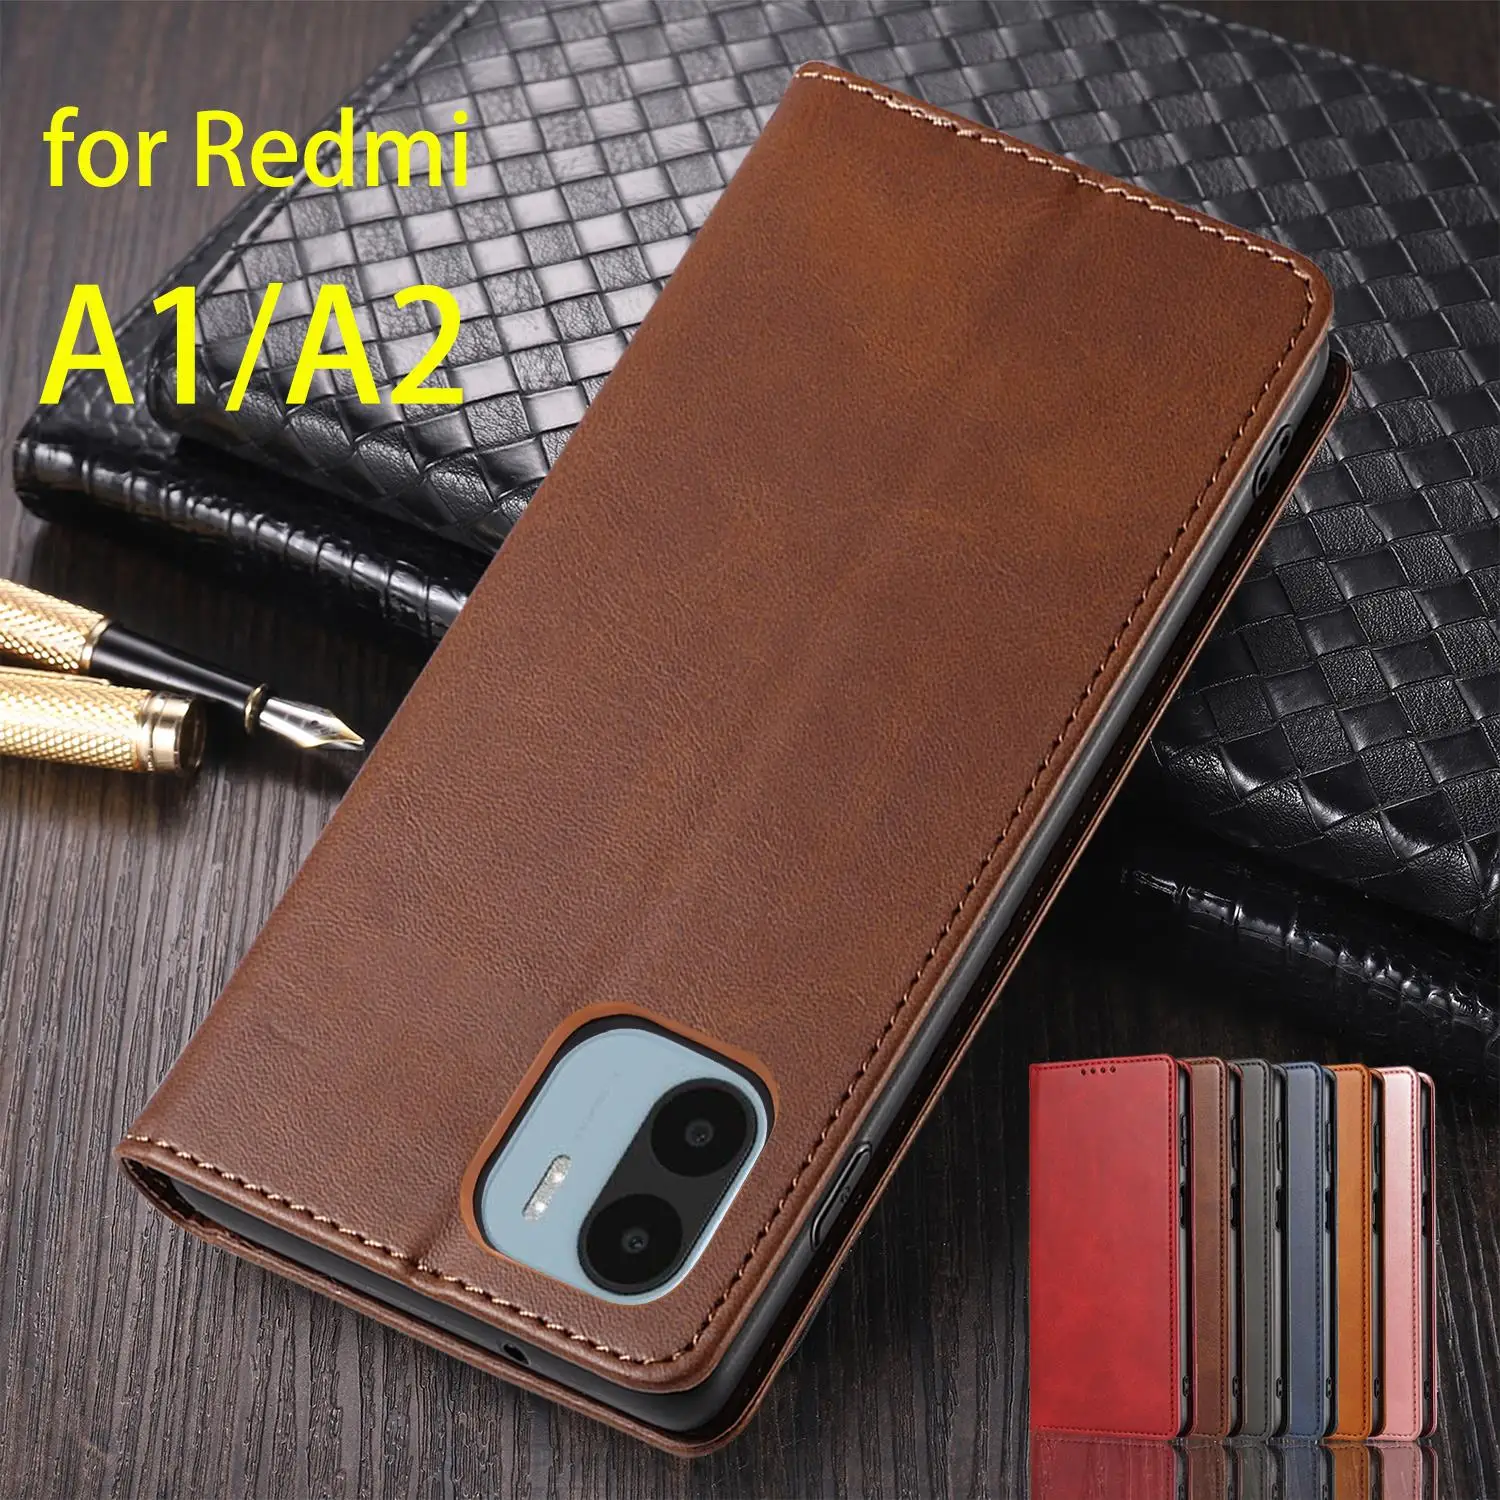 

Magnetic Attraction Cover Leather Case for Xiaomi Redmi A1 Flip Case Card Holder Holster Case Redmi A2 Wallet Case Fundas Coque